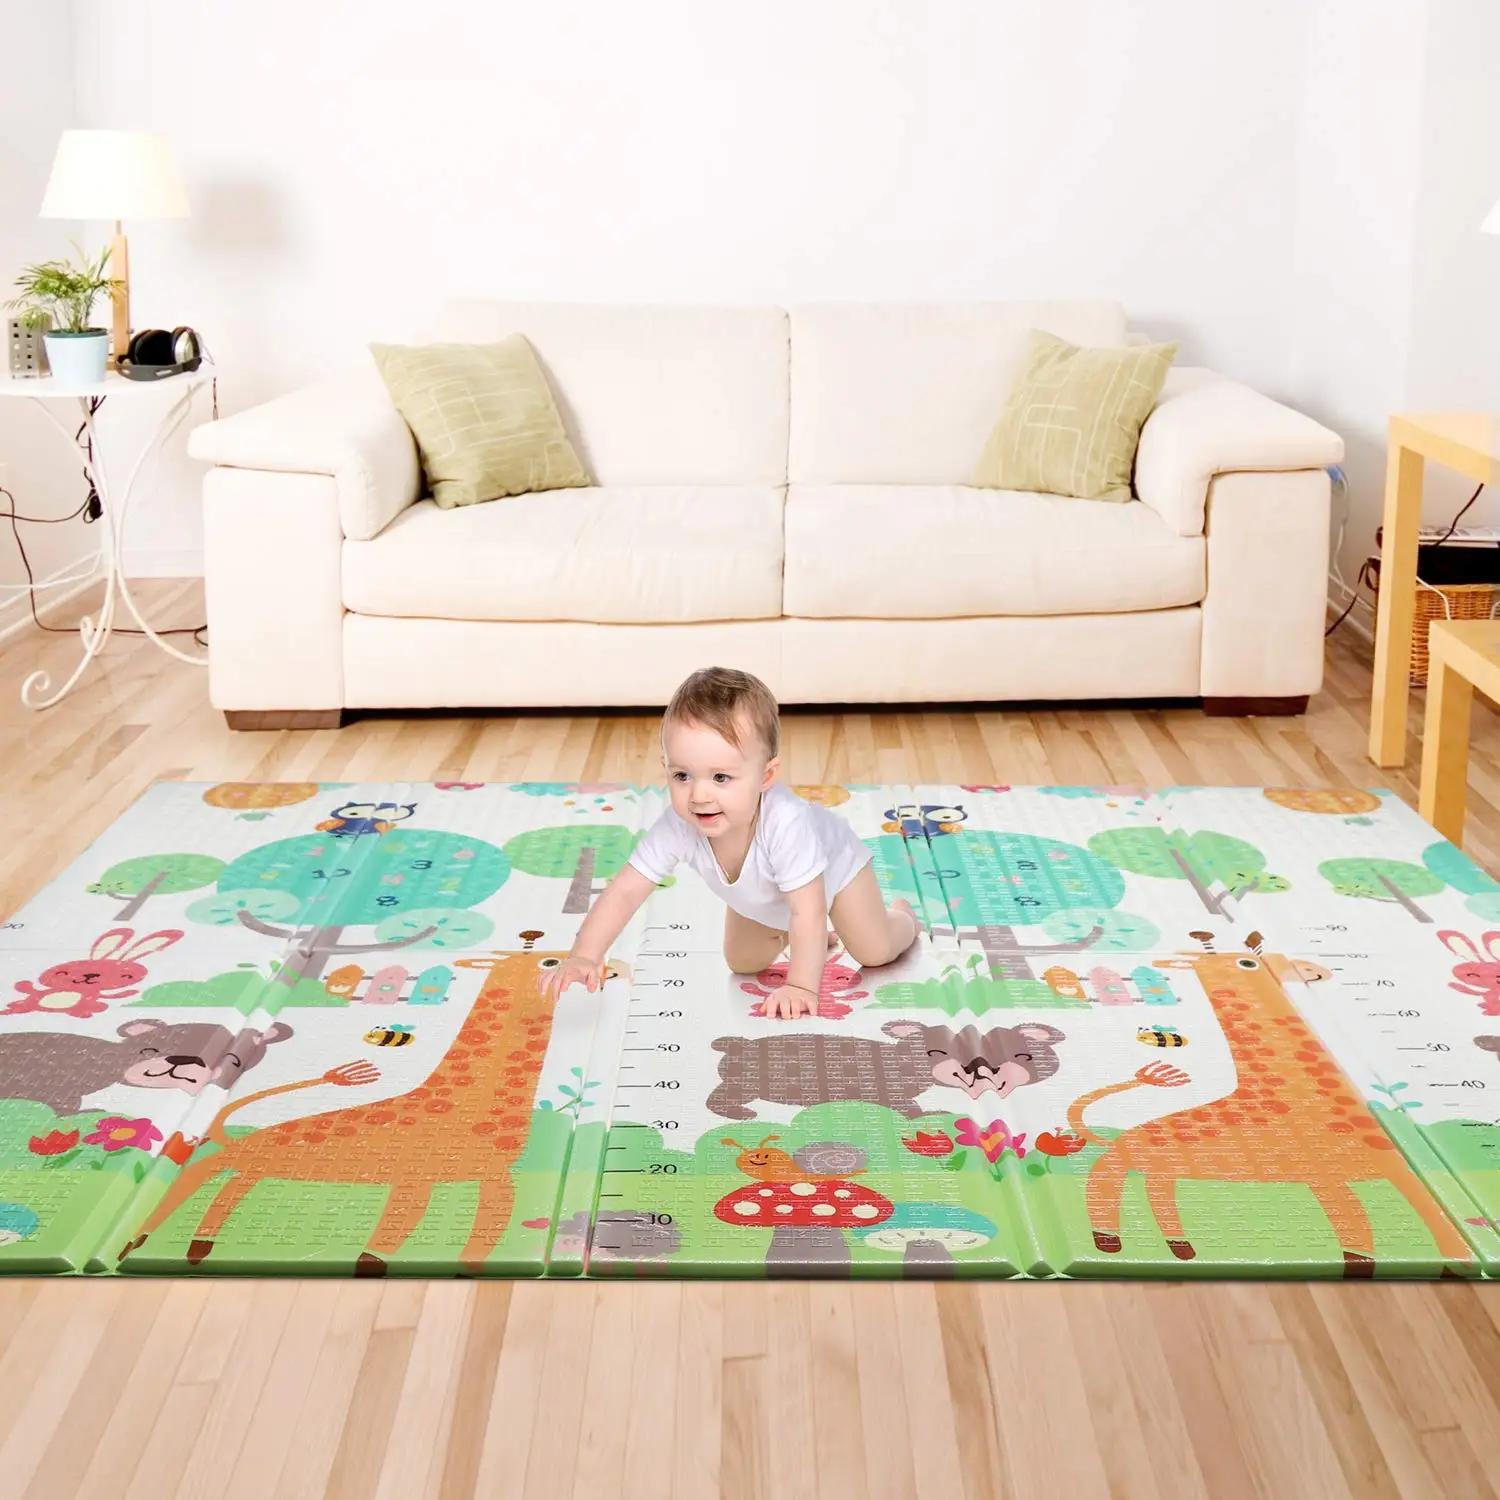 Reversible Extra Large Soft Baby Crawling Mat Infant Double-Sided Non-Slip Waterproof XPE Foam Floor Mat for Kids 78x70x0.4 Foldable Baby Play Mats Toddler 